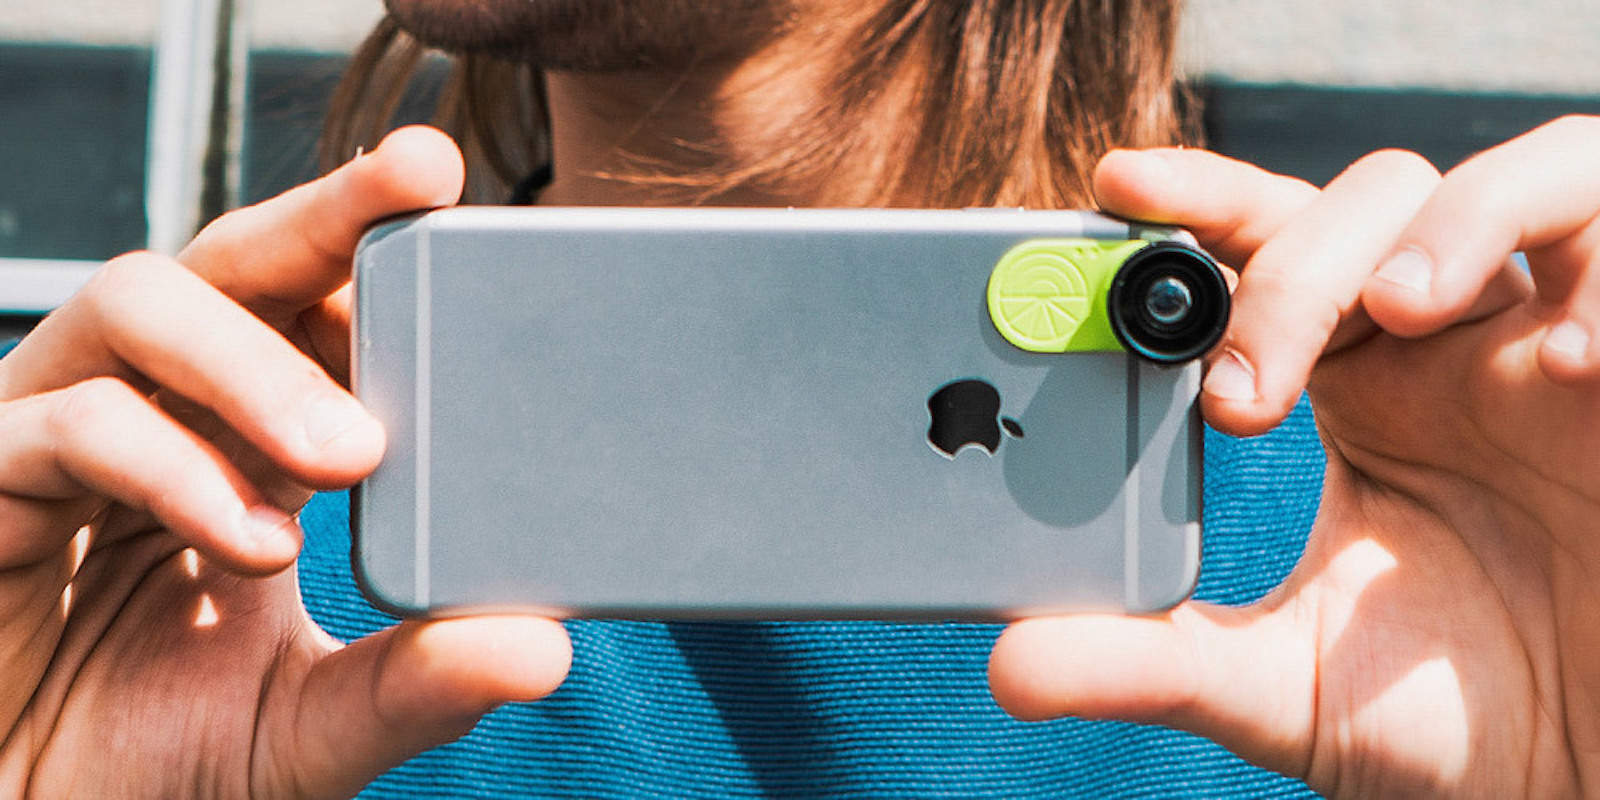 Instantly add a pair of powerful new lenses to your phone or tablet with this click-on adapter.